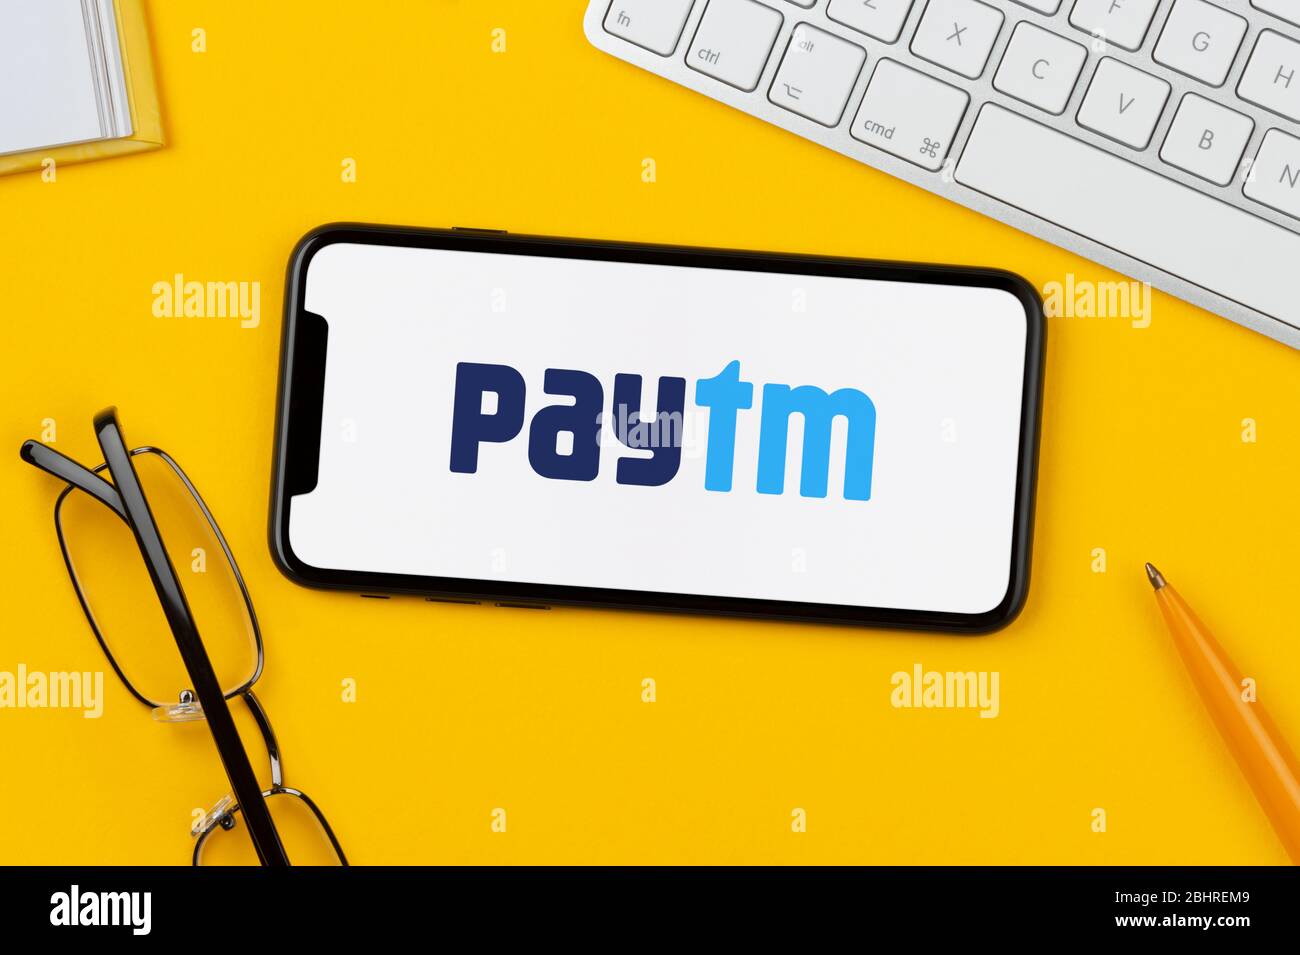 A smartphone showing the PayTM logo rests on a yellow background along with a keyboard, glasses, pen and book (Editorial use only). Stock Photo